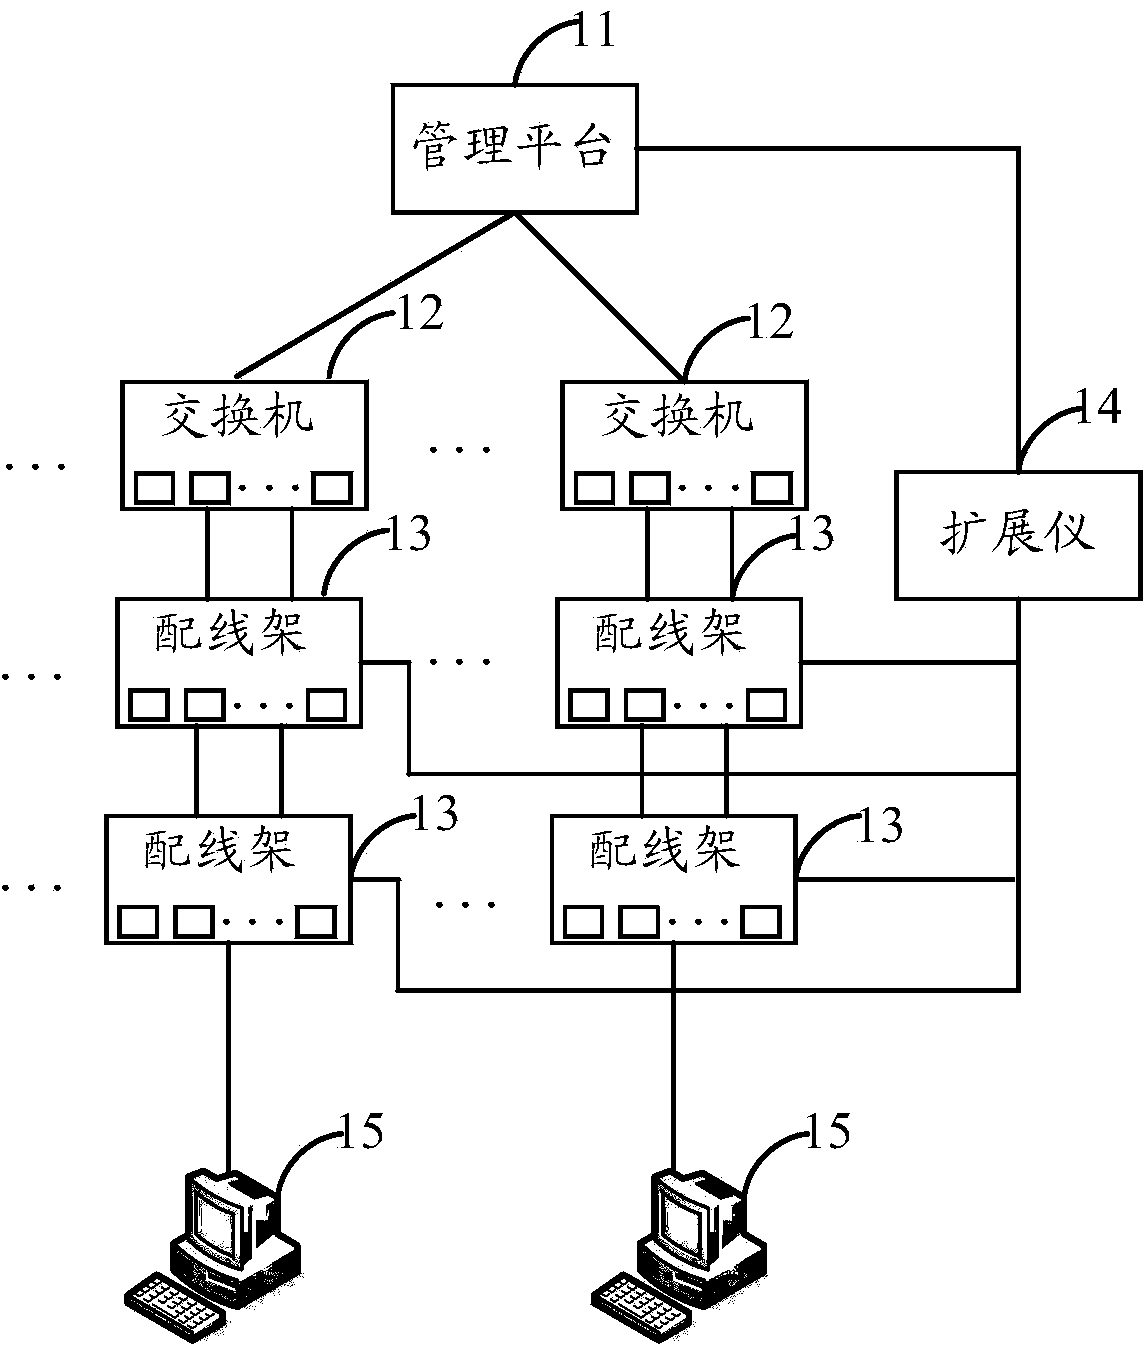 Port connection relationship determination method and device